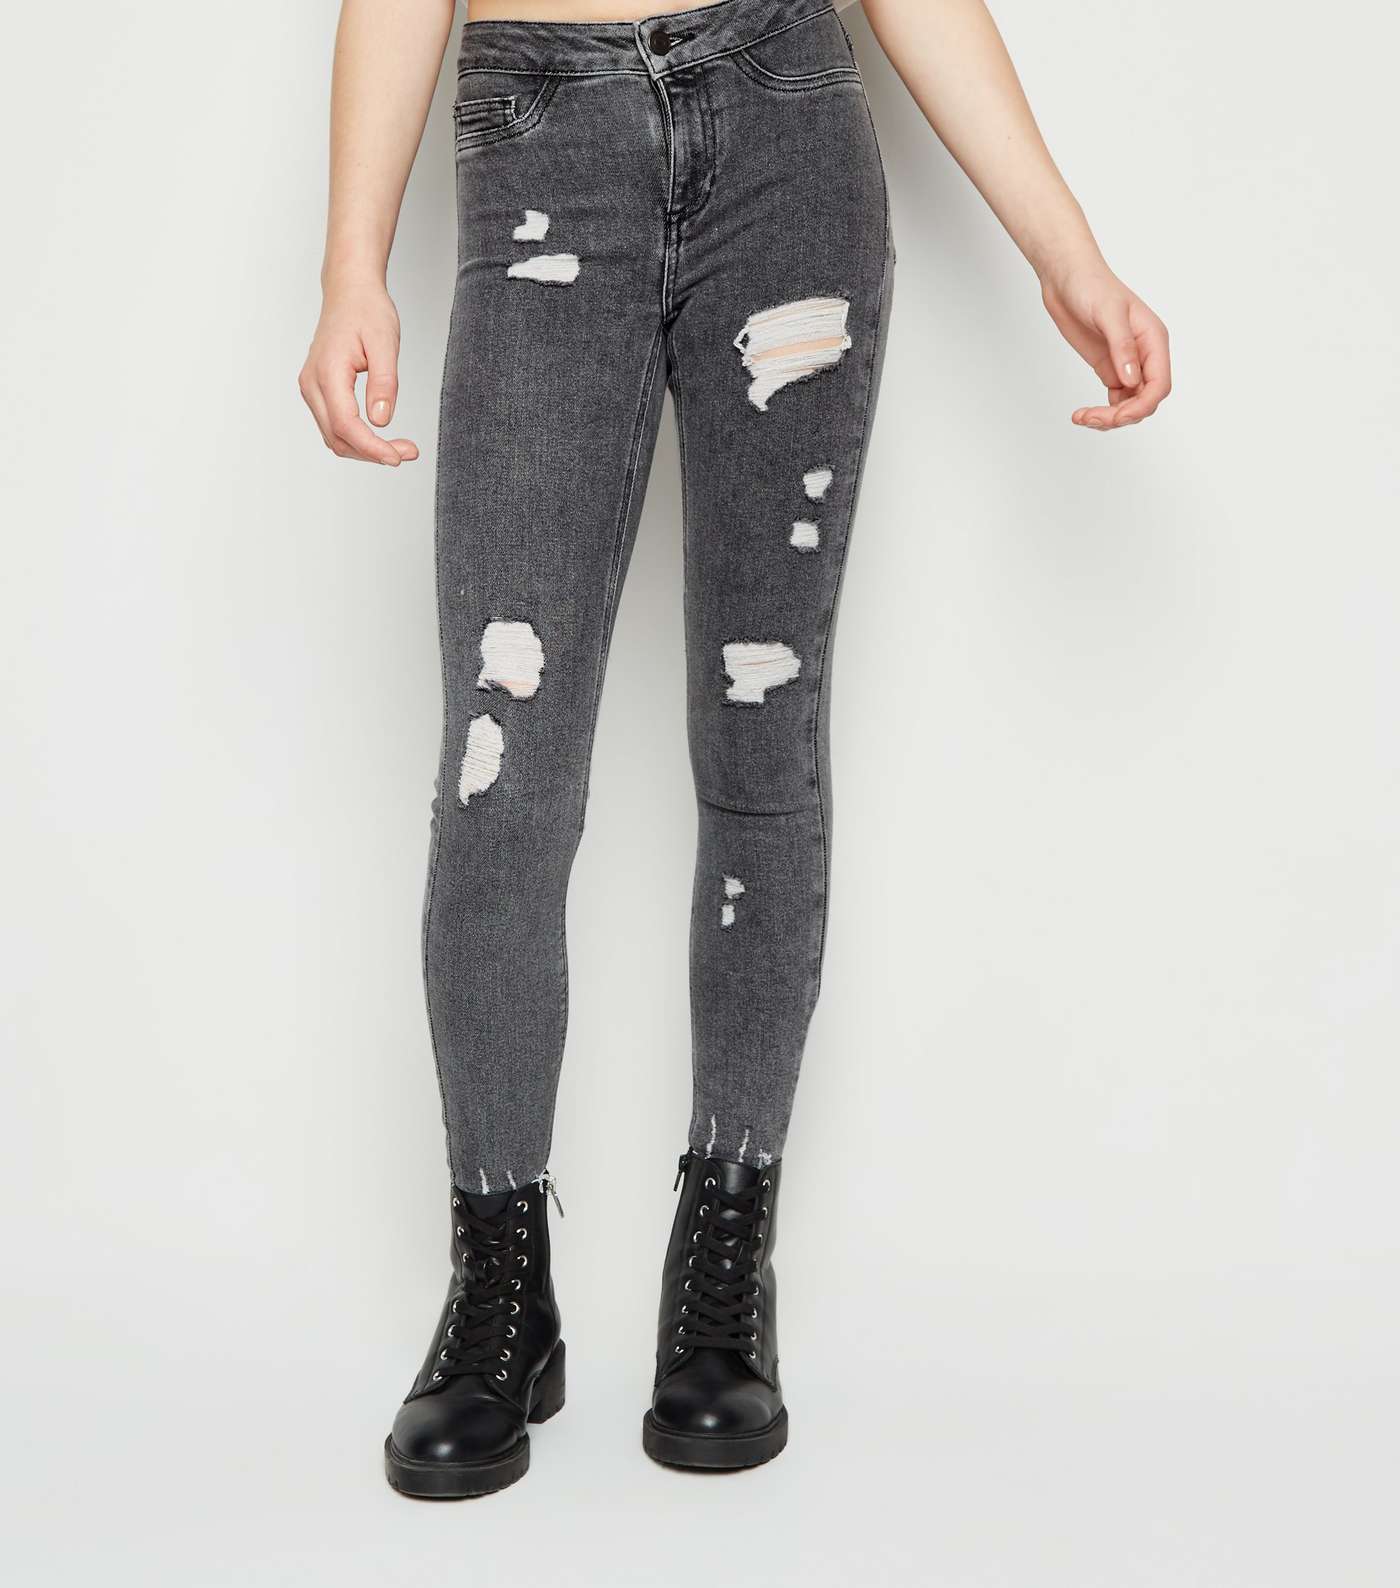 Girls Grey Ripped High Waist Super Skinny Jeans Image 2